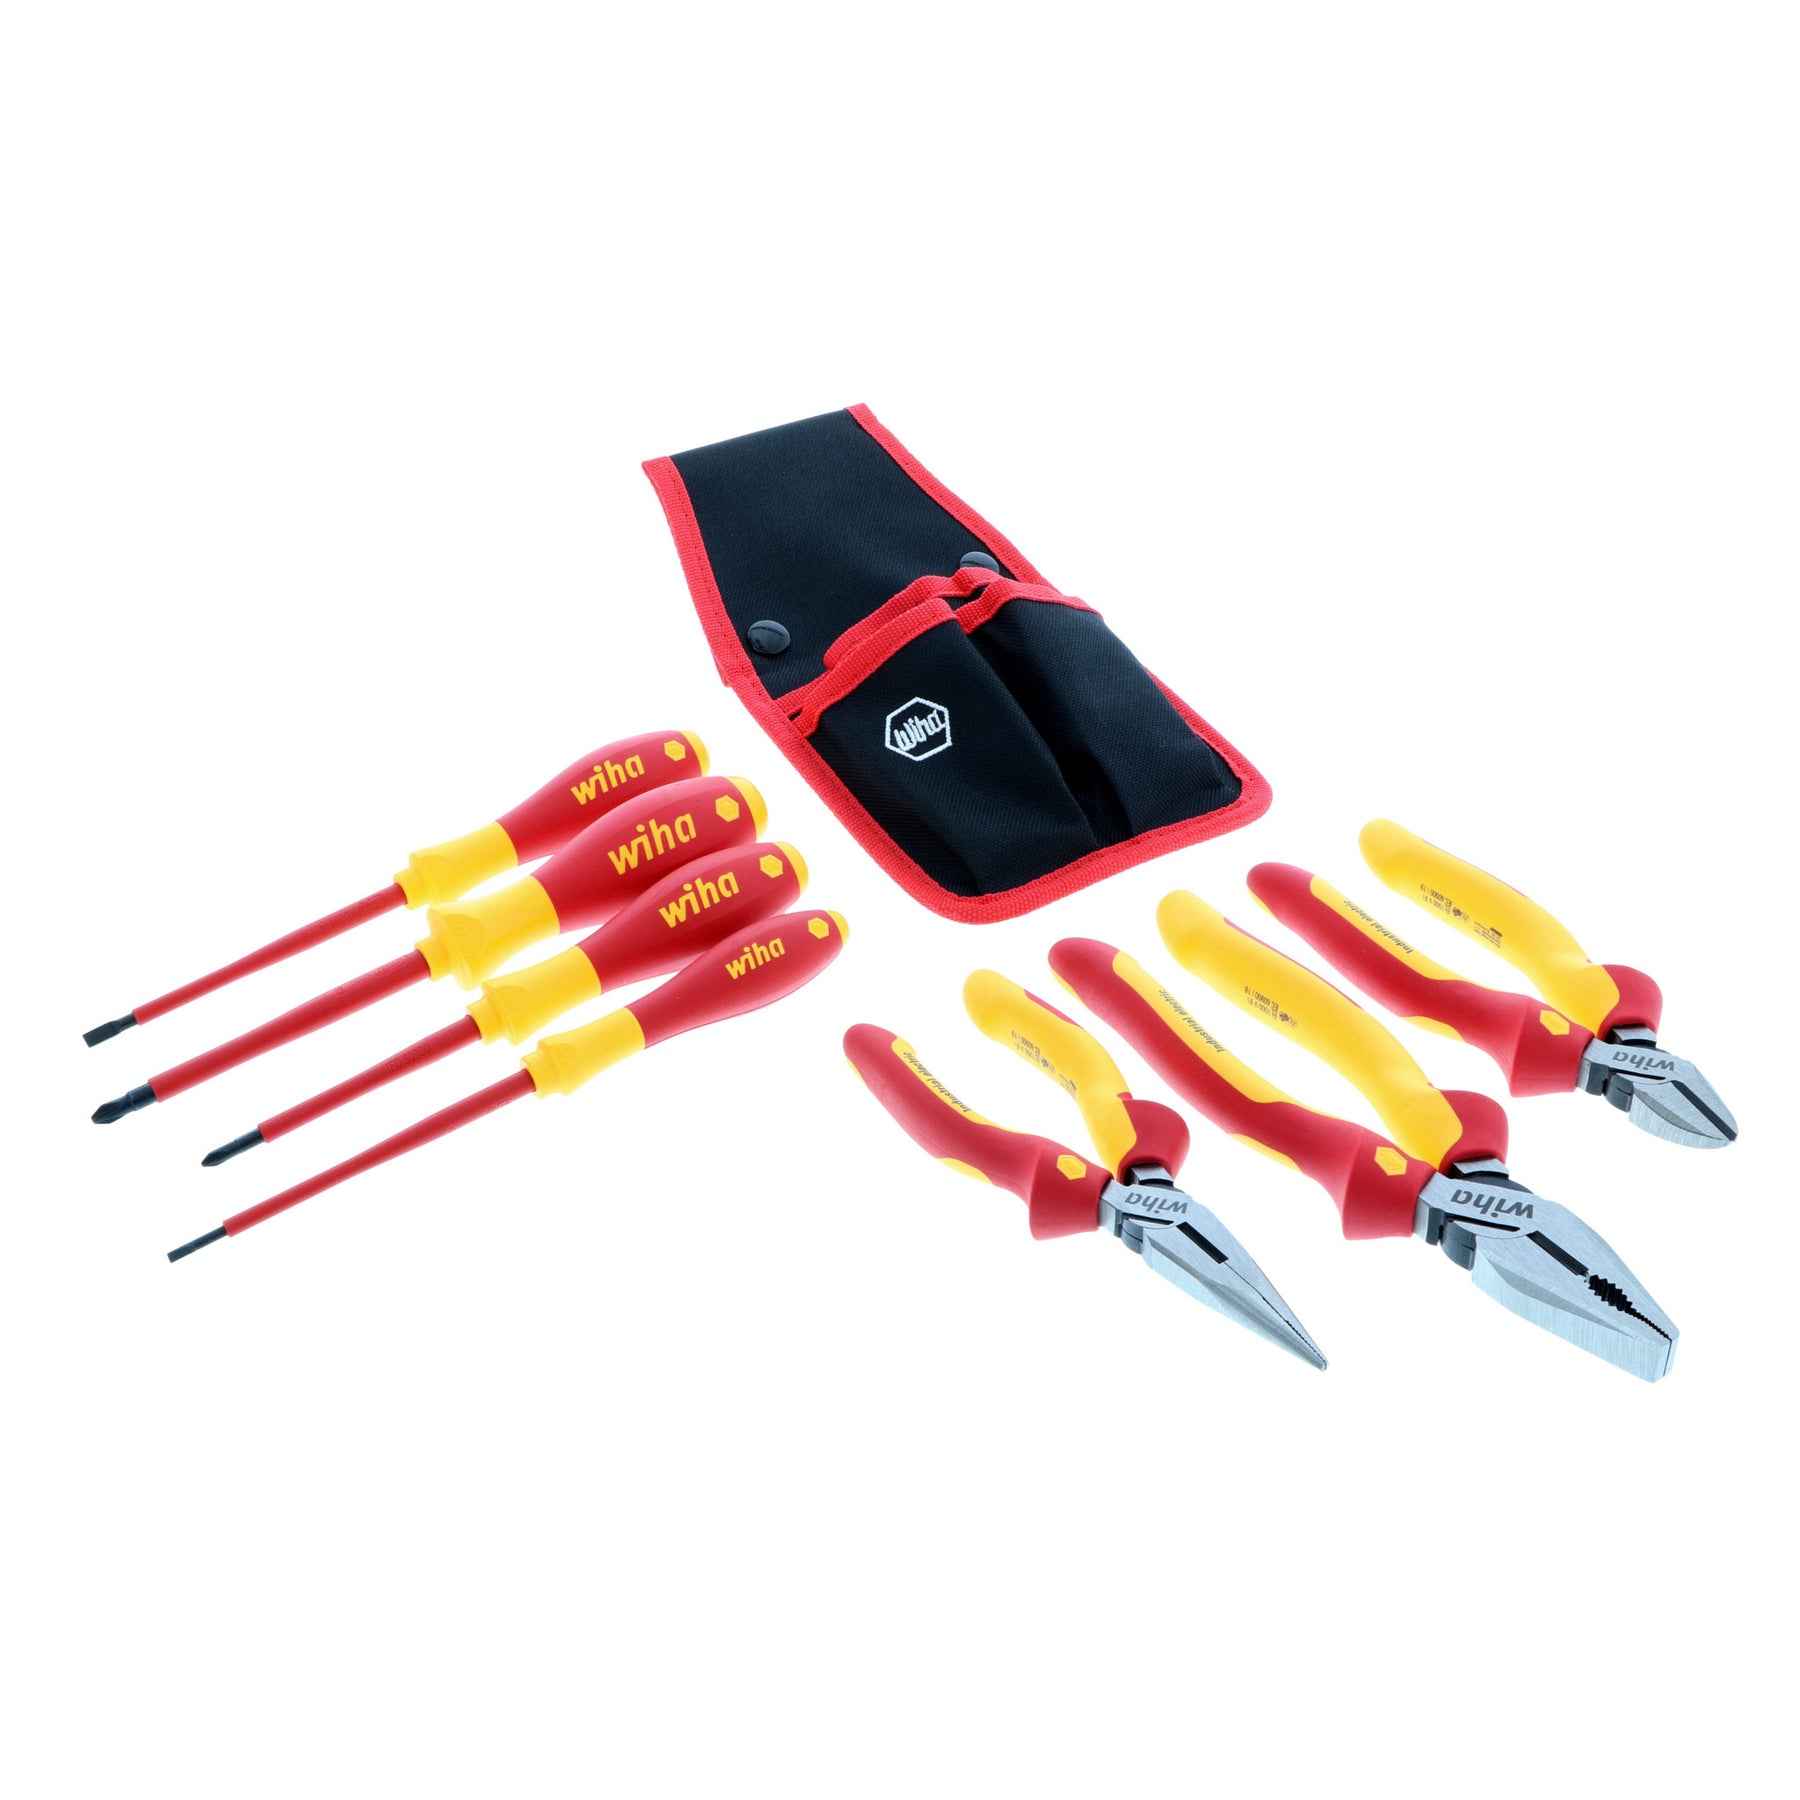 Wiha 32985 Insulated Industrial Pliers/Drivers Set